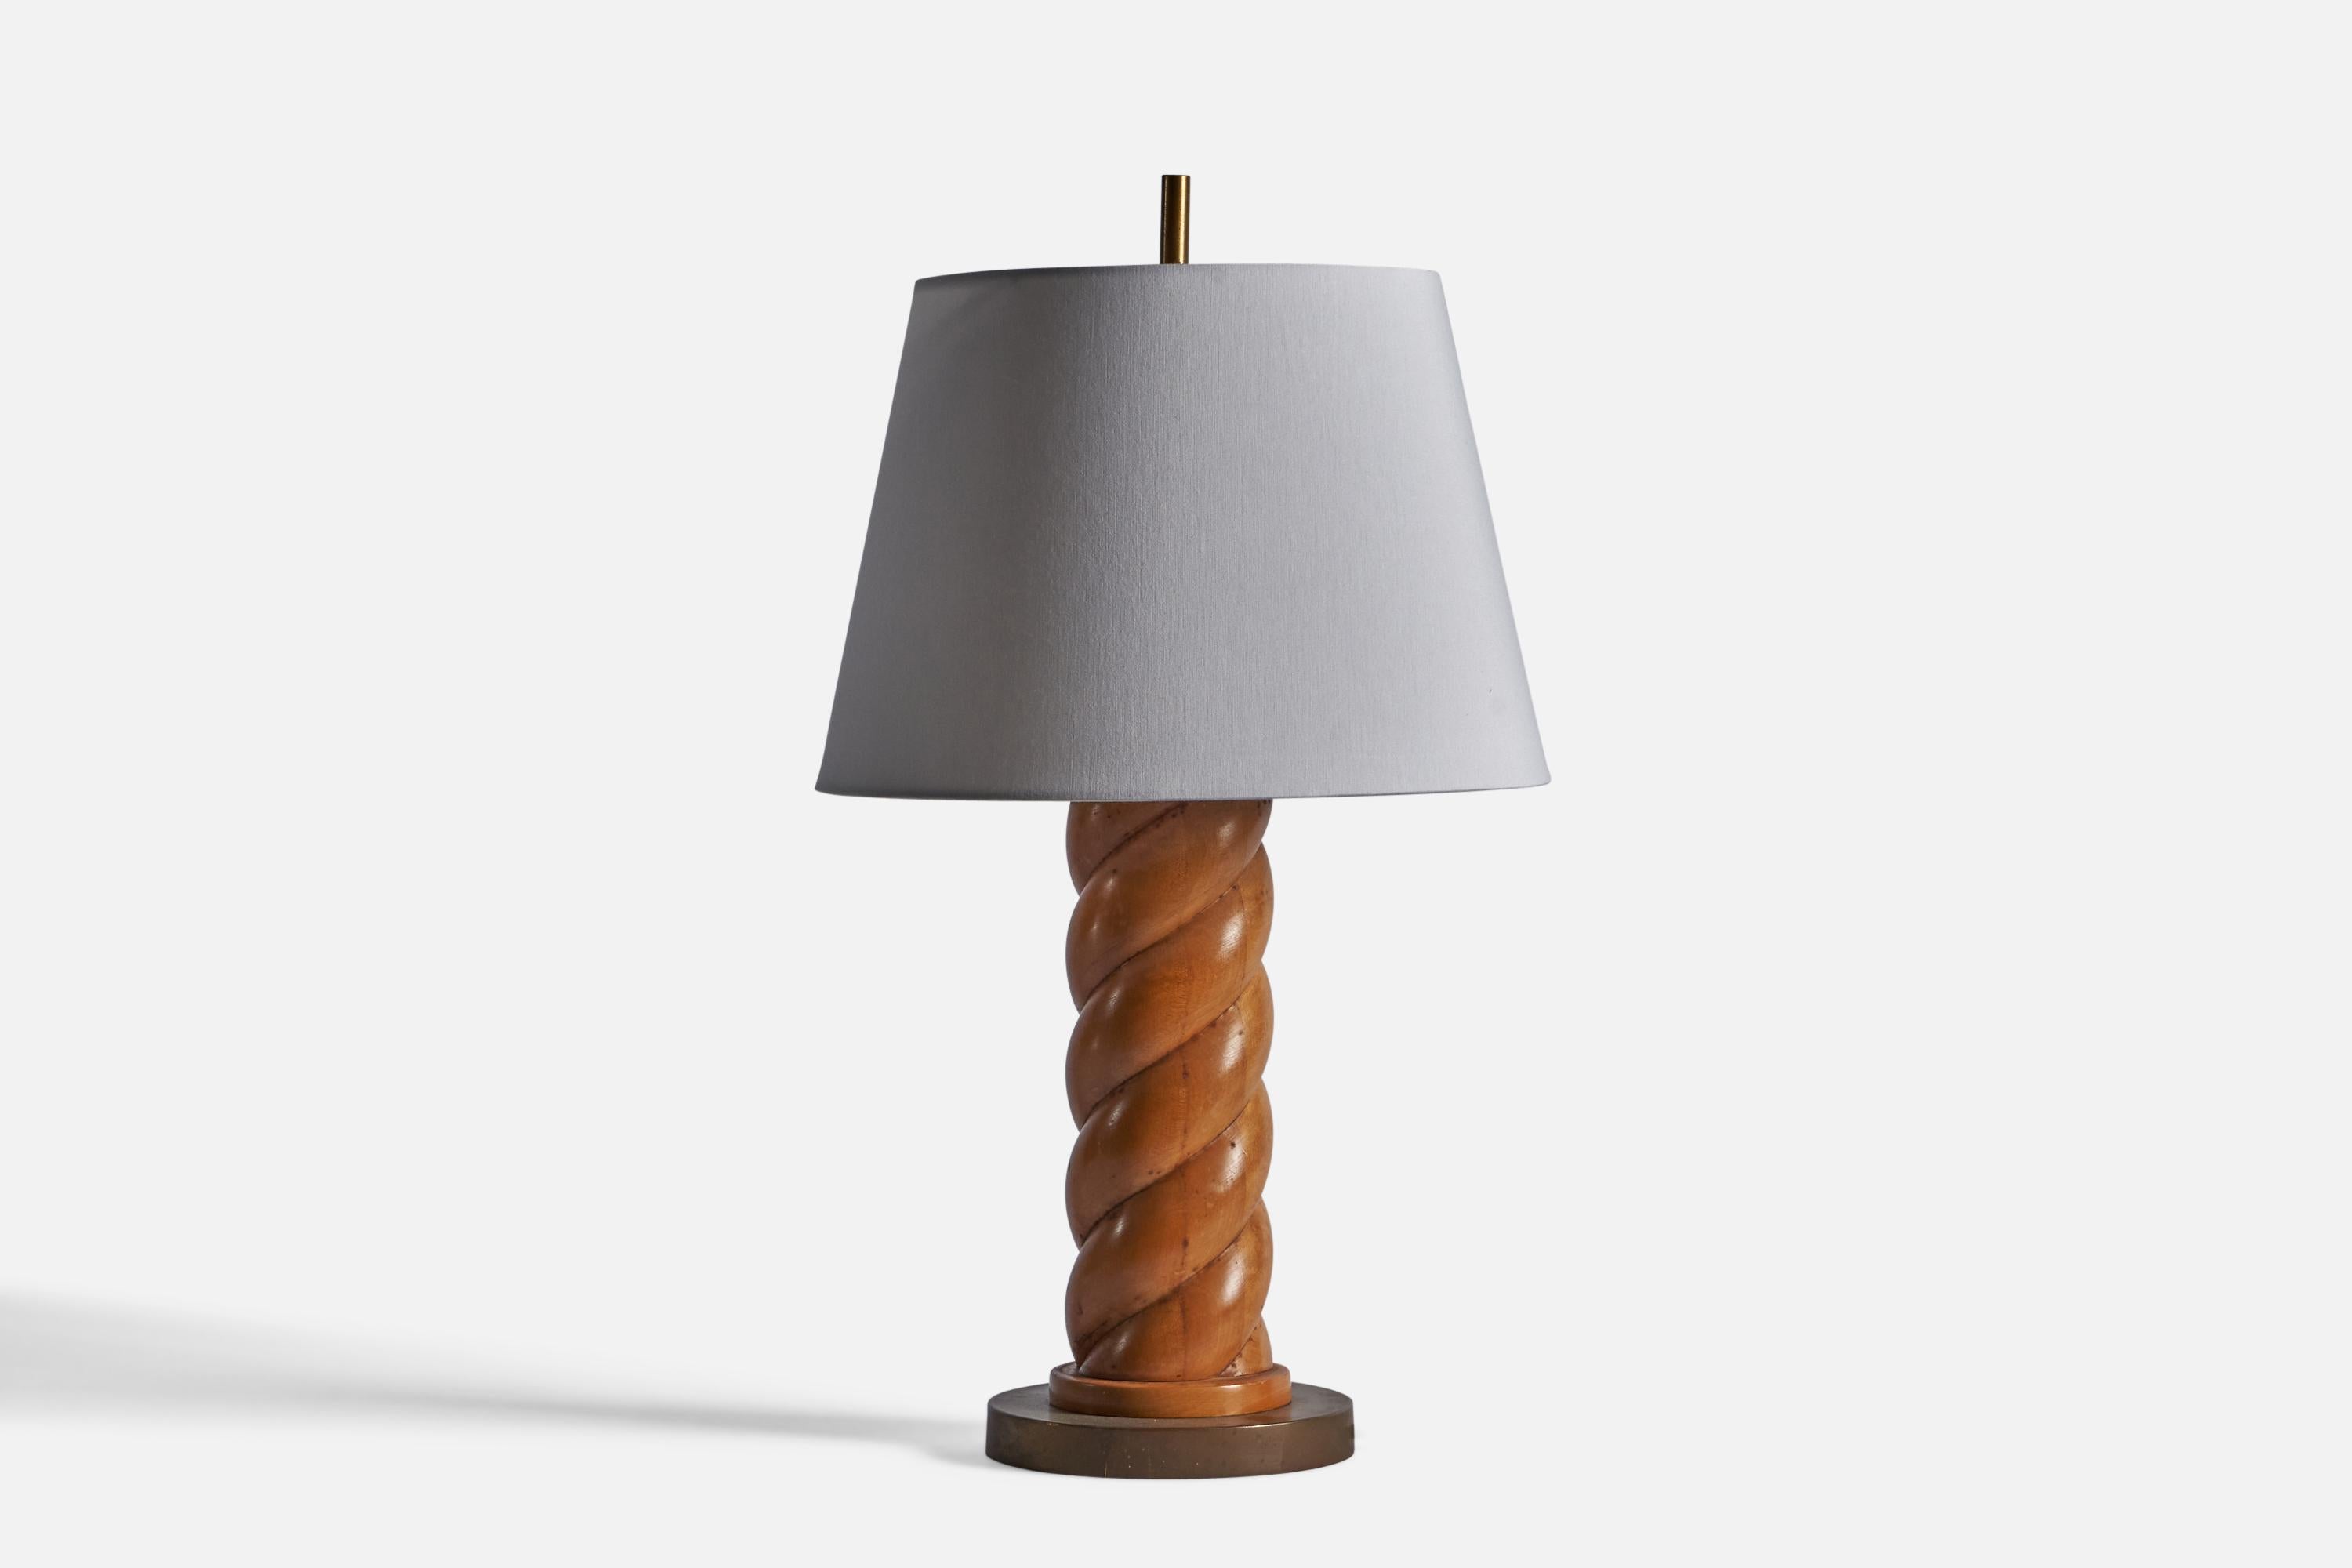 An oak and brass table lamp, designed and produced in the US, 1950s.

Dimensions of Lamp (inches) : 25